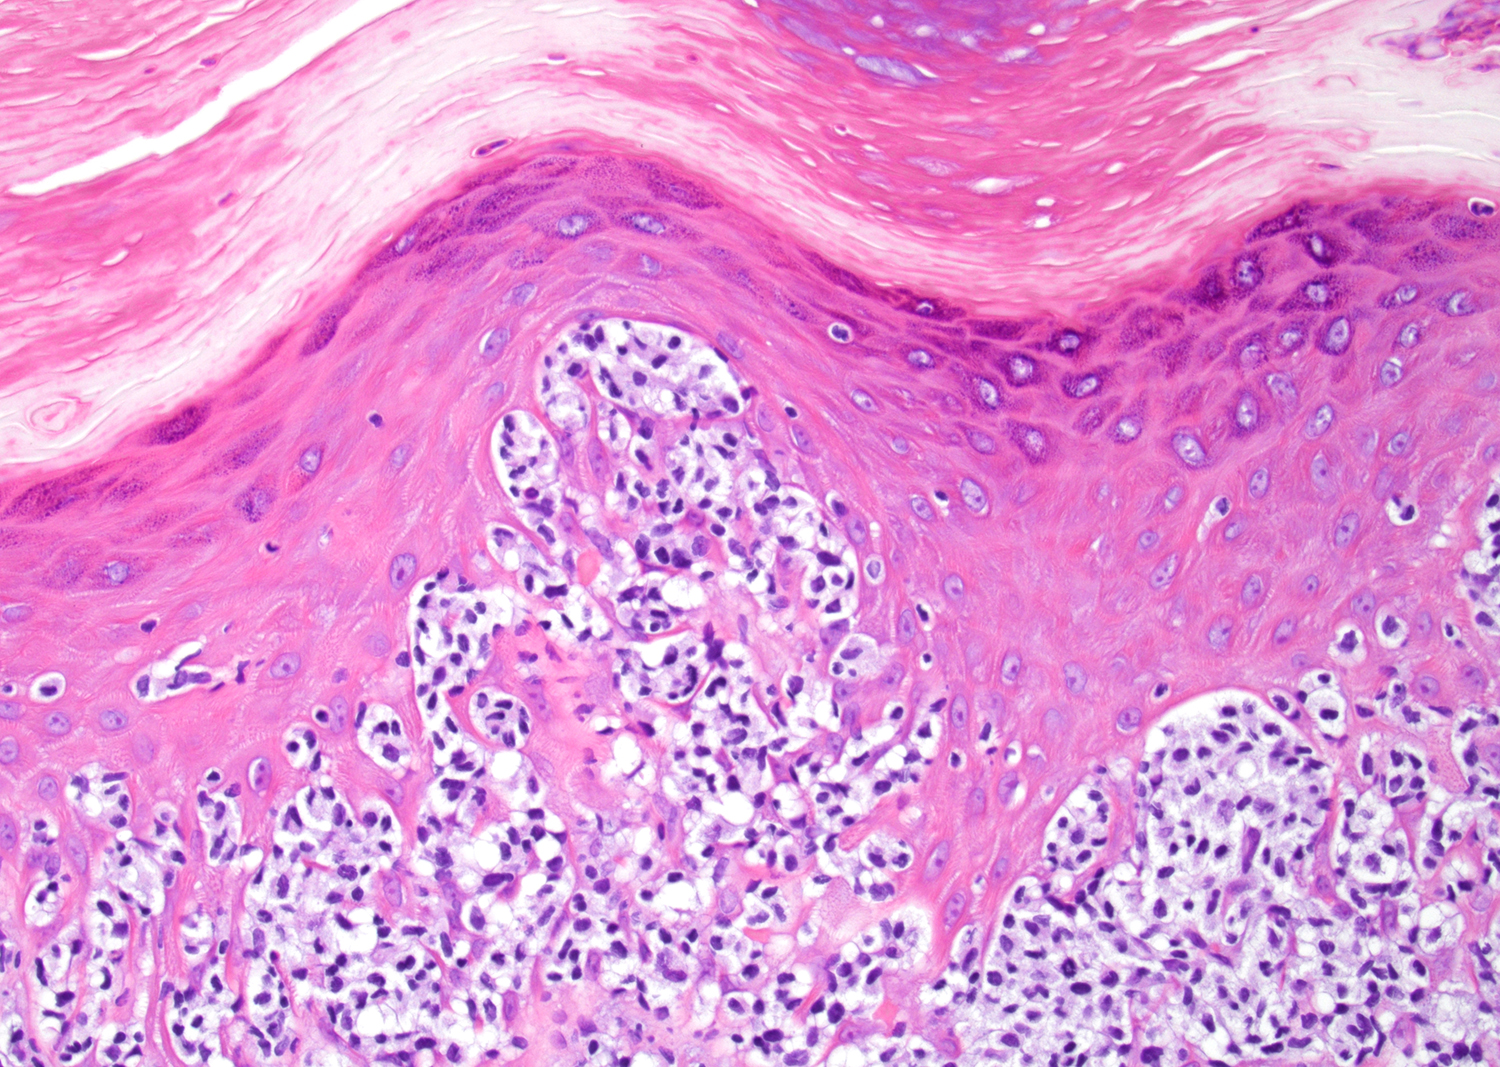 Microabscess of Pautrier in pagetoid reticulosis 